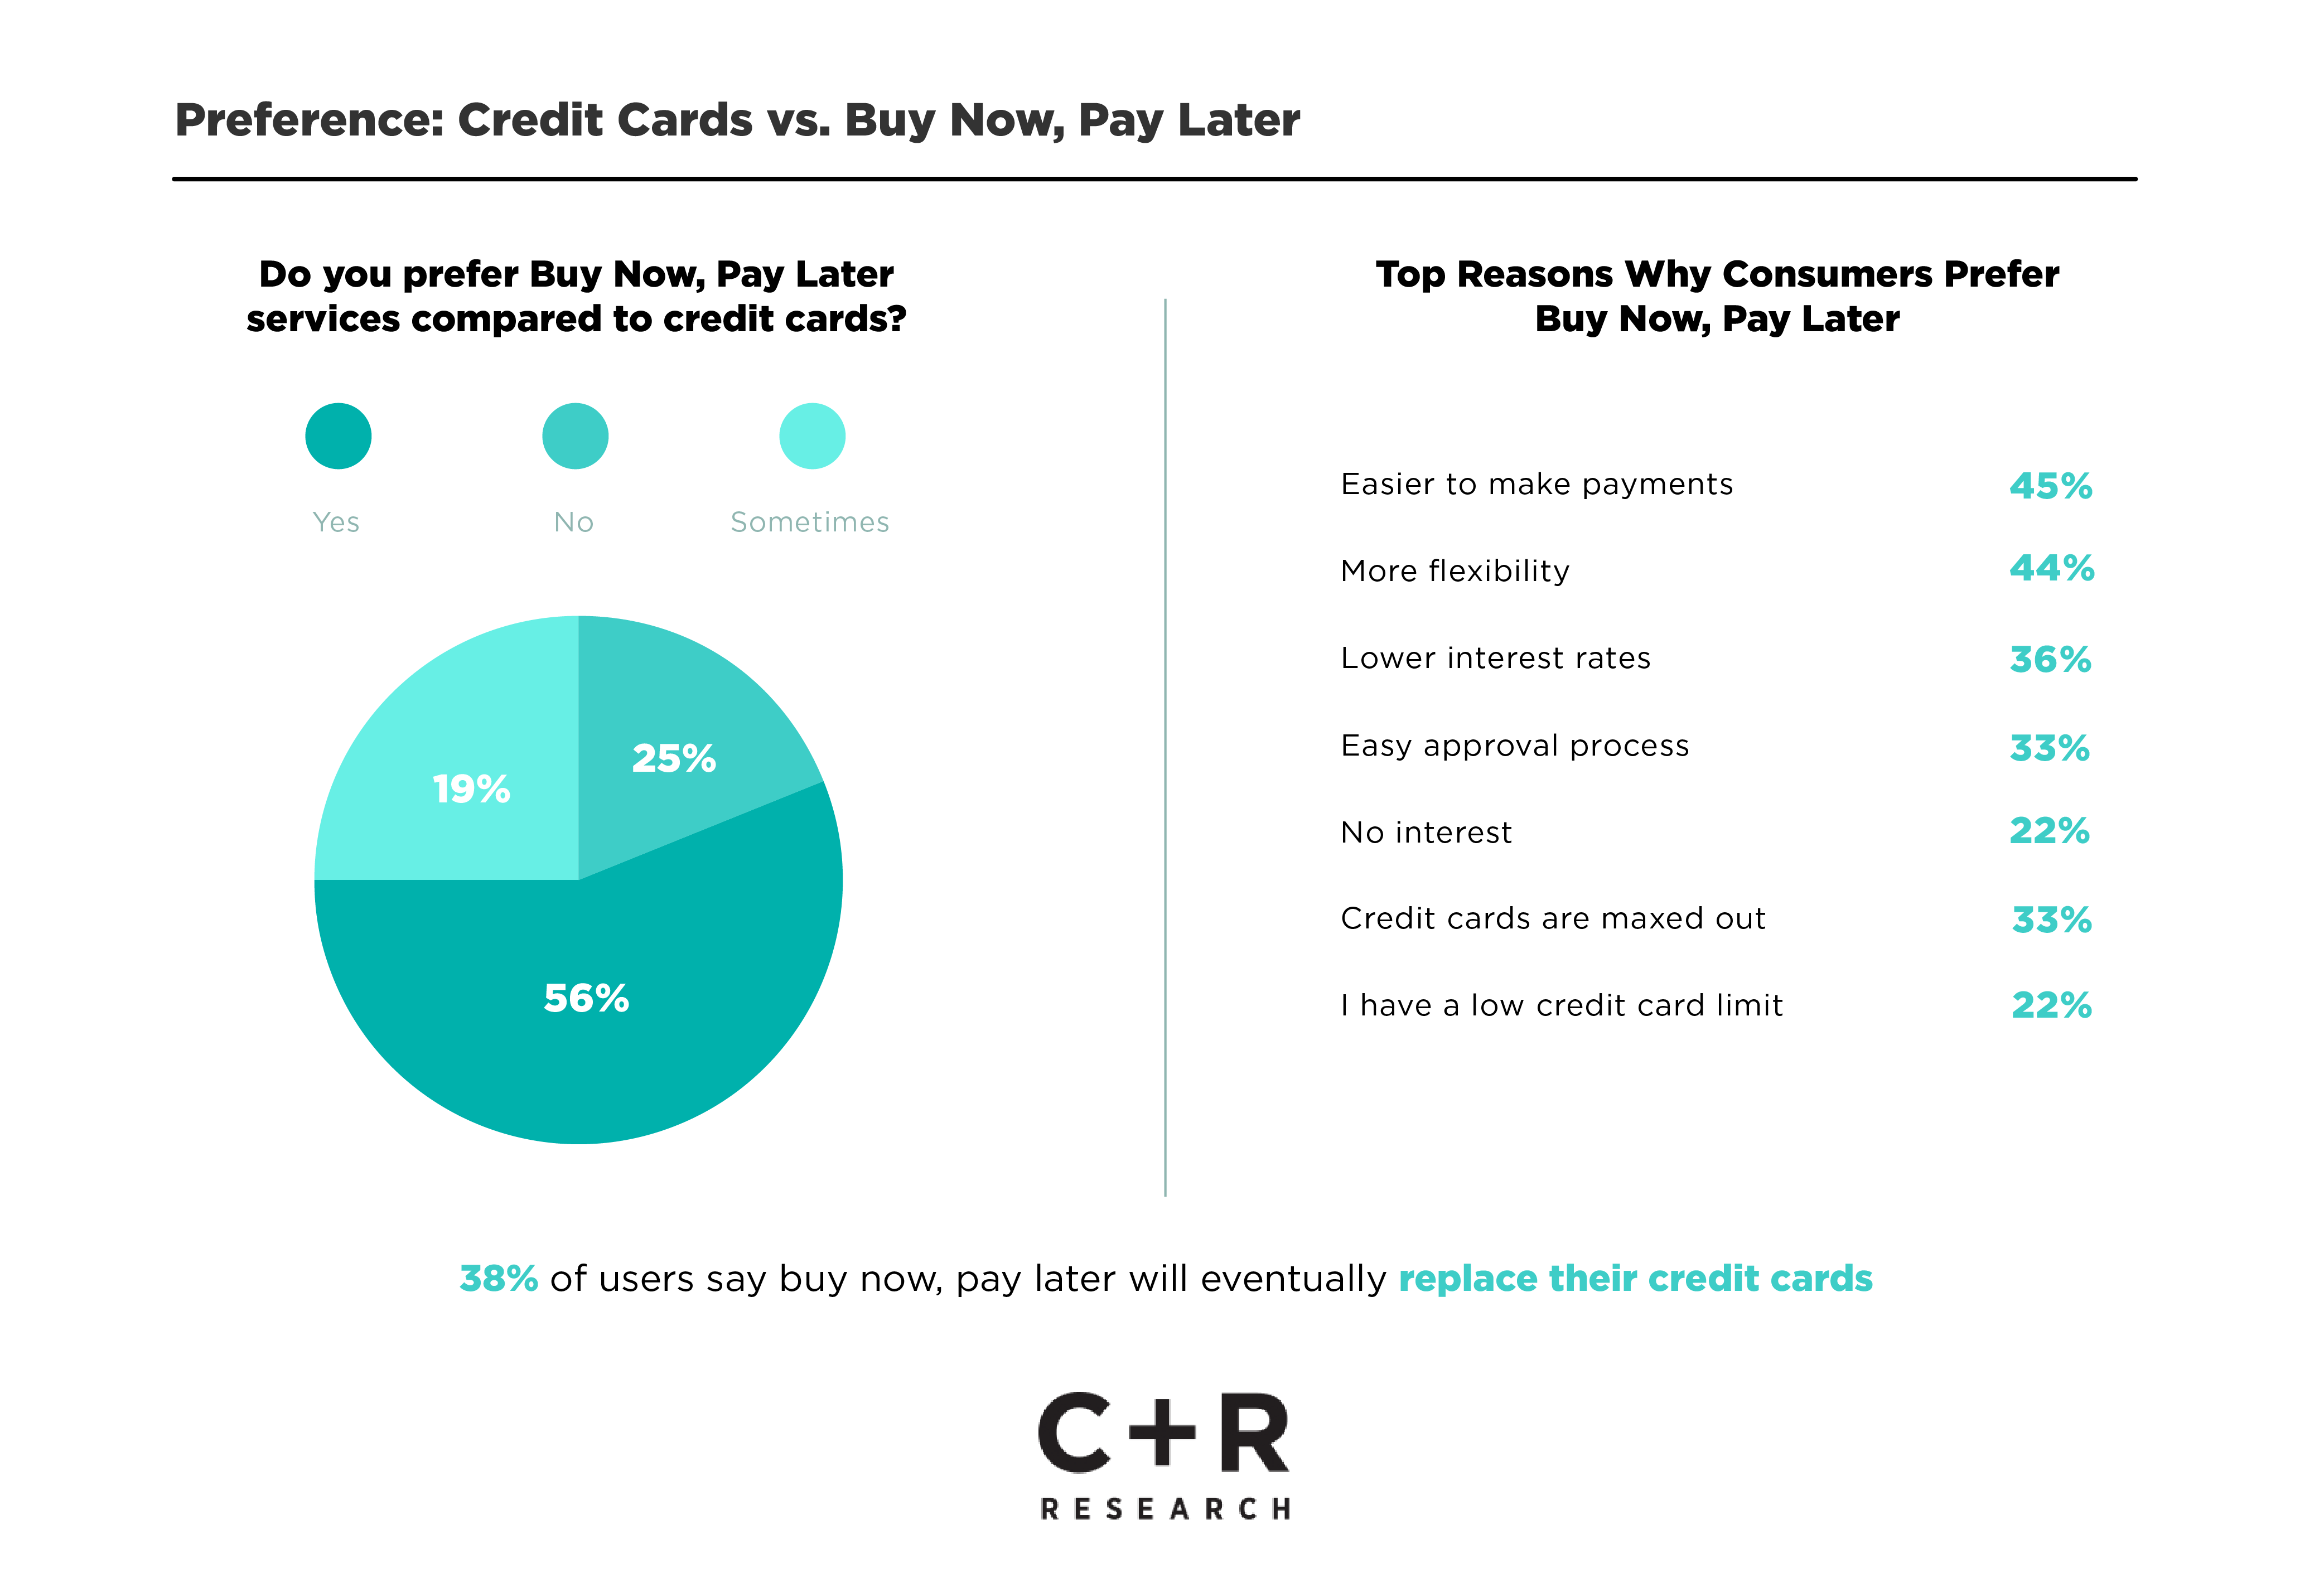 Credit Cards or Buy Now, Pay Later?